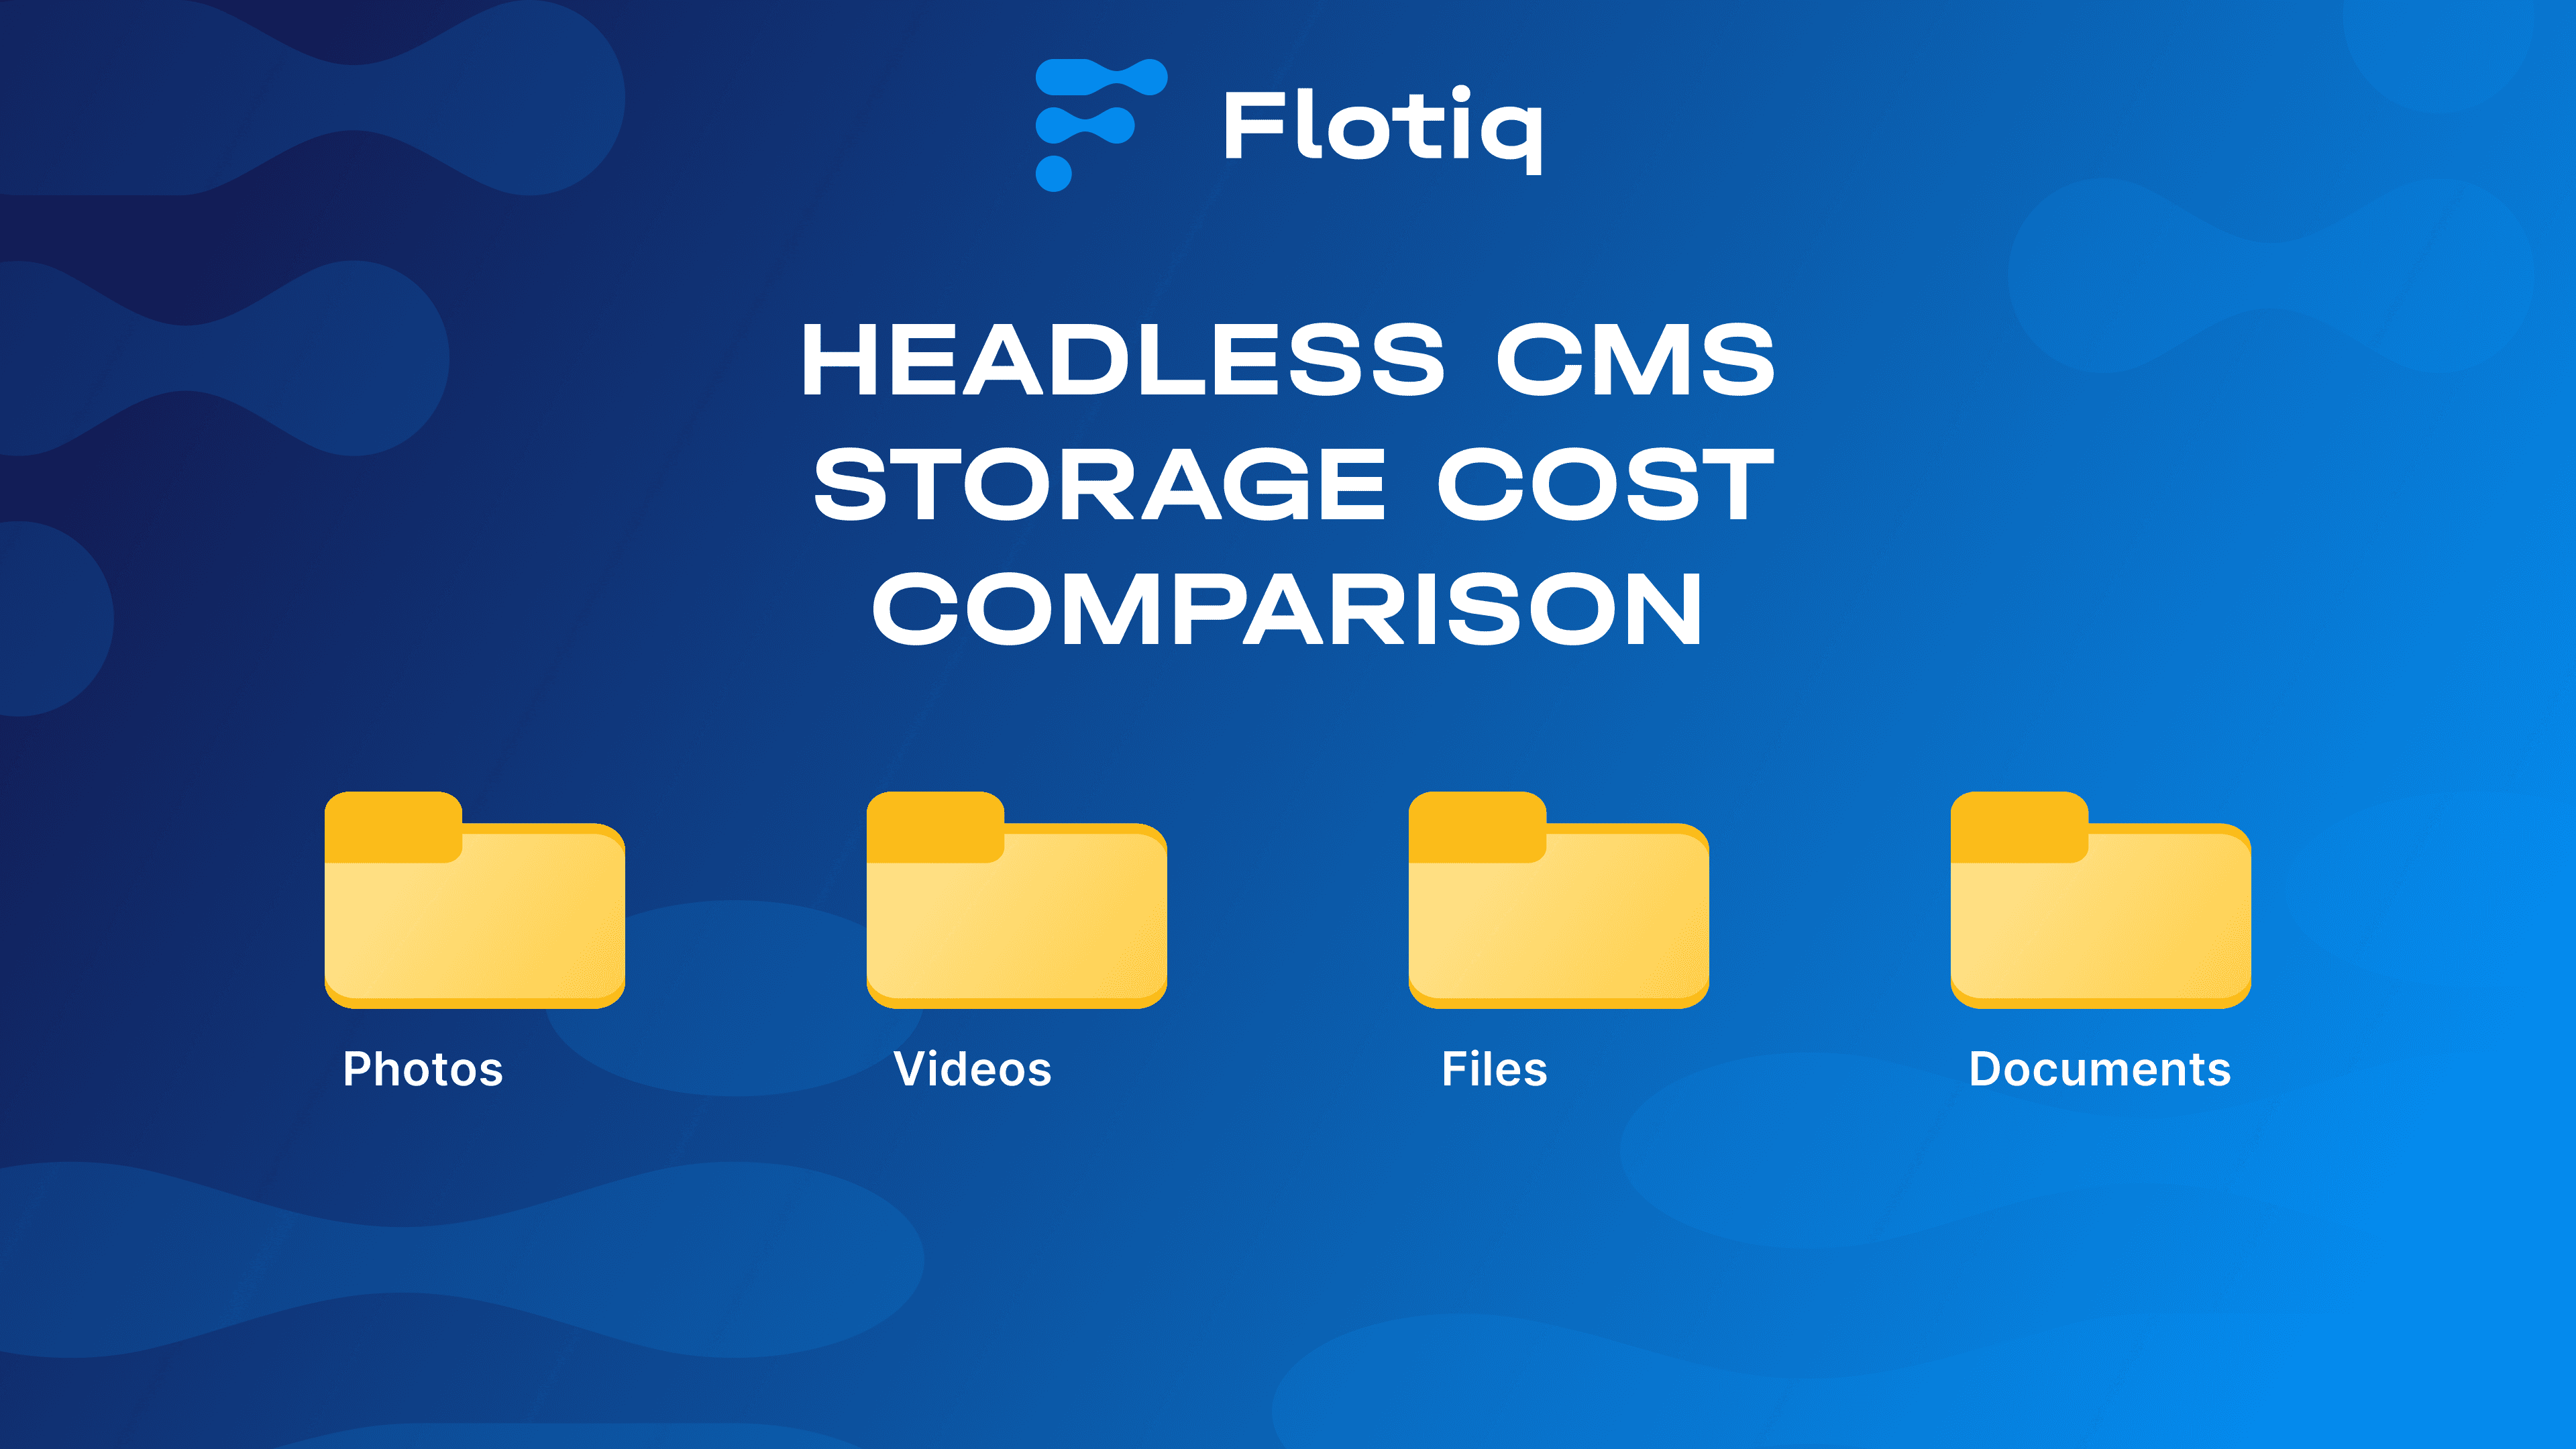 Headless CMS storage cost comparison - how much you will pay for storage in 2022